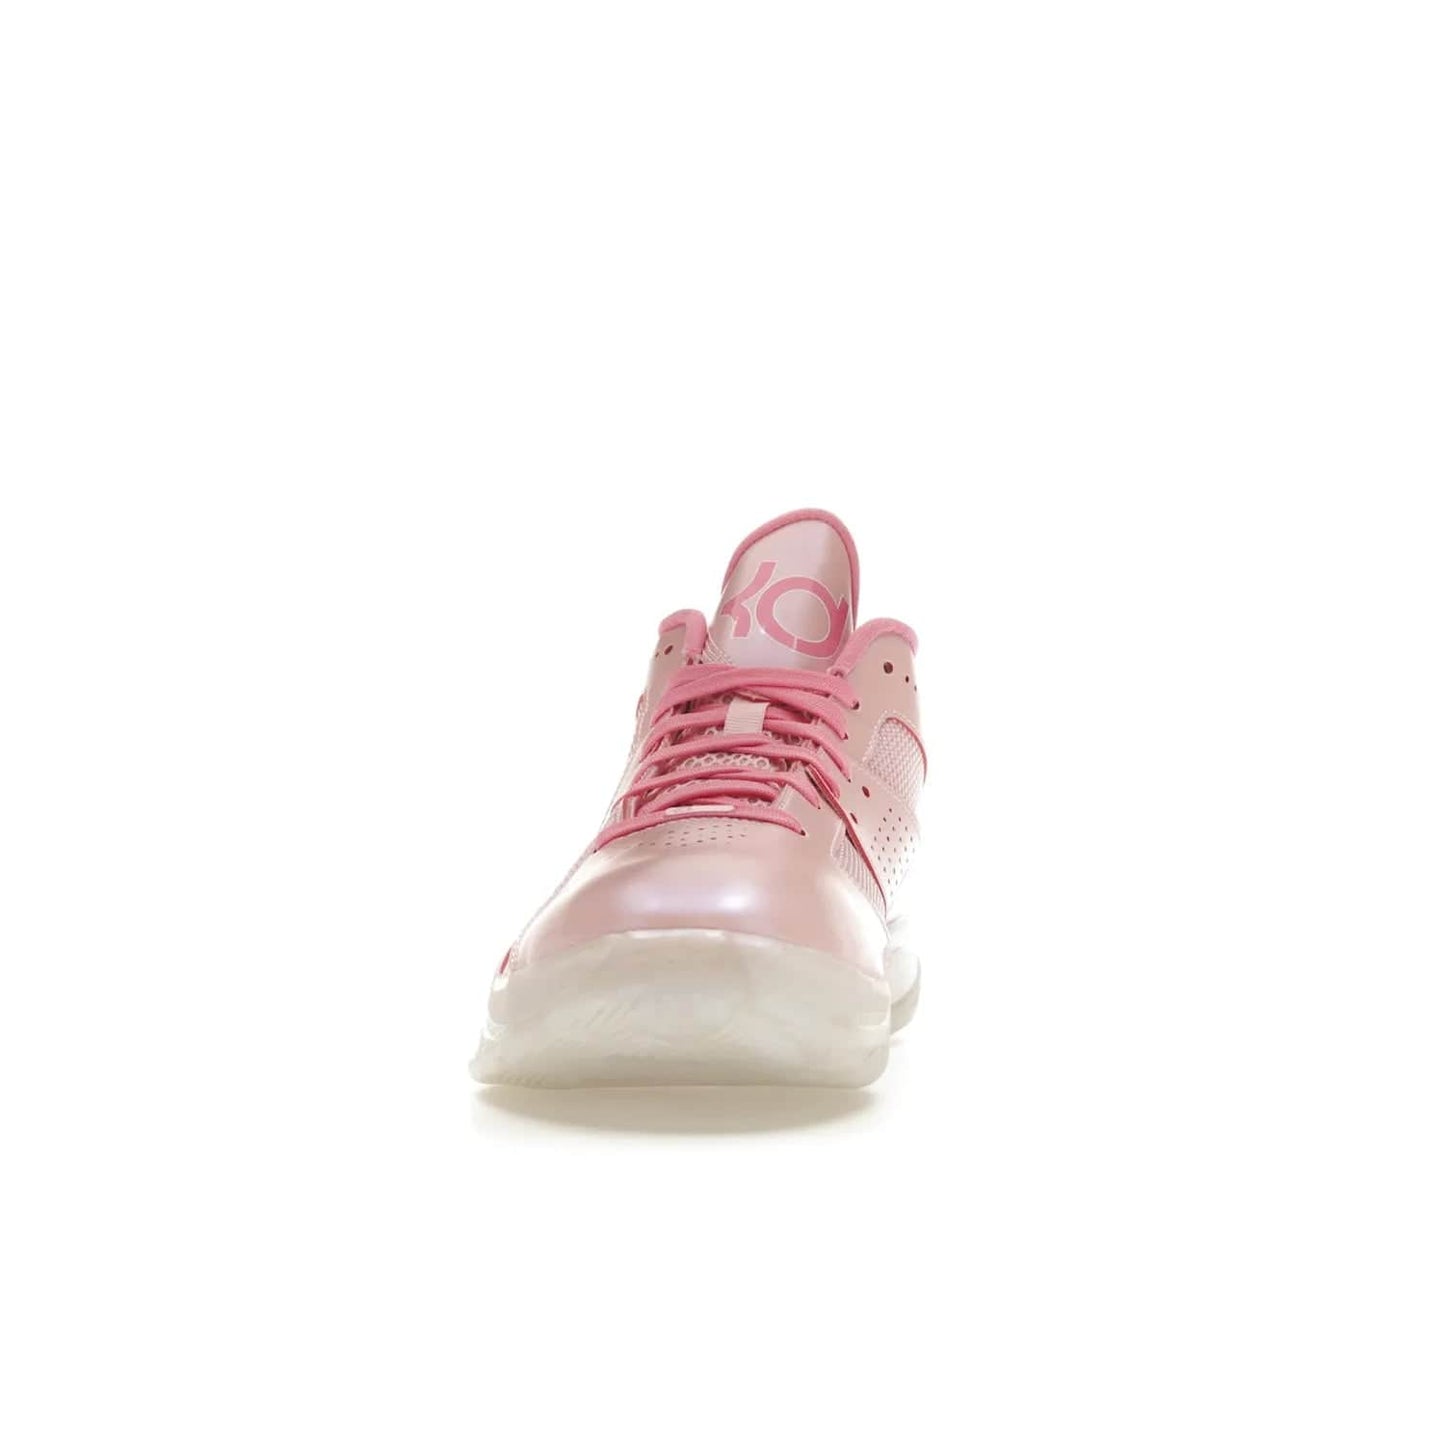 Nike KD 3 Aunt Pearl - Image 11 - Only at www.BallersClubKickz.com - Introducing the Nike KD 3 Aunt Pearl. Featuring a bold Medium Soft Pink, White, & Lotus Pink colorway. Get ready to stand out this October 15th.